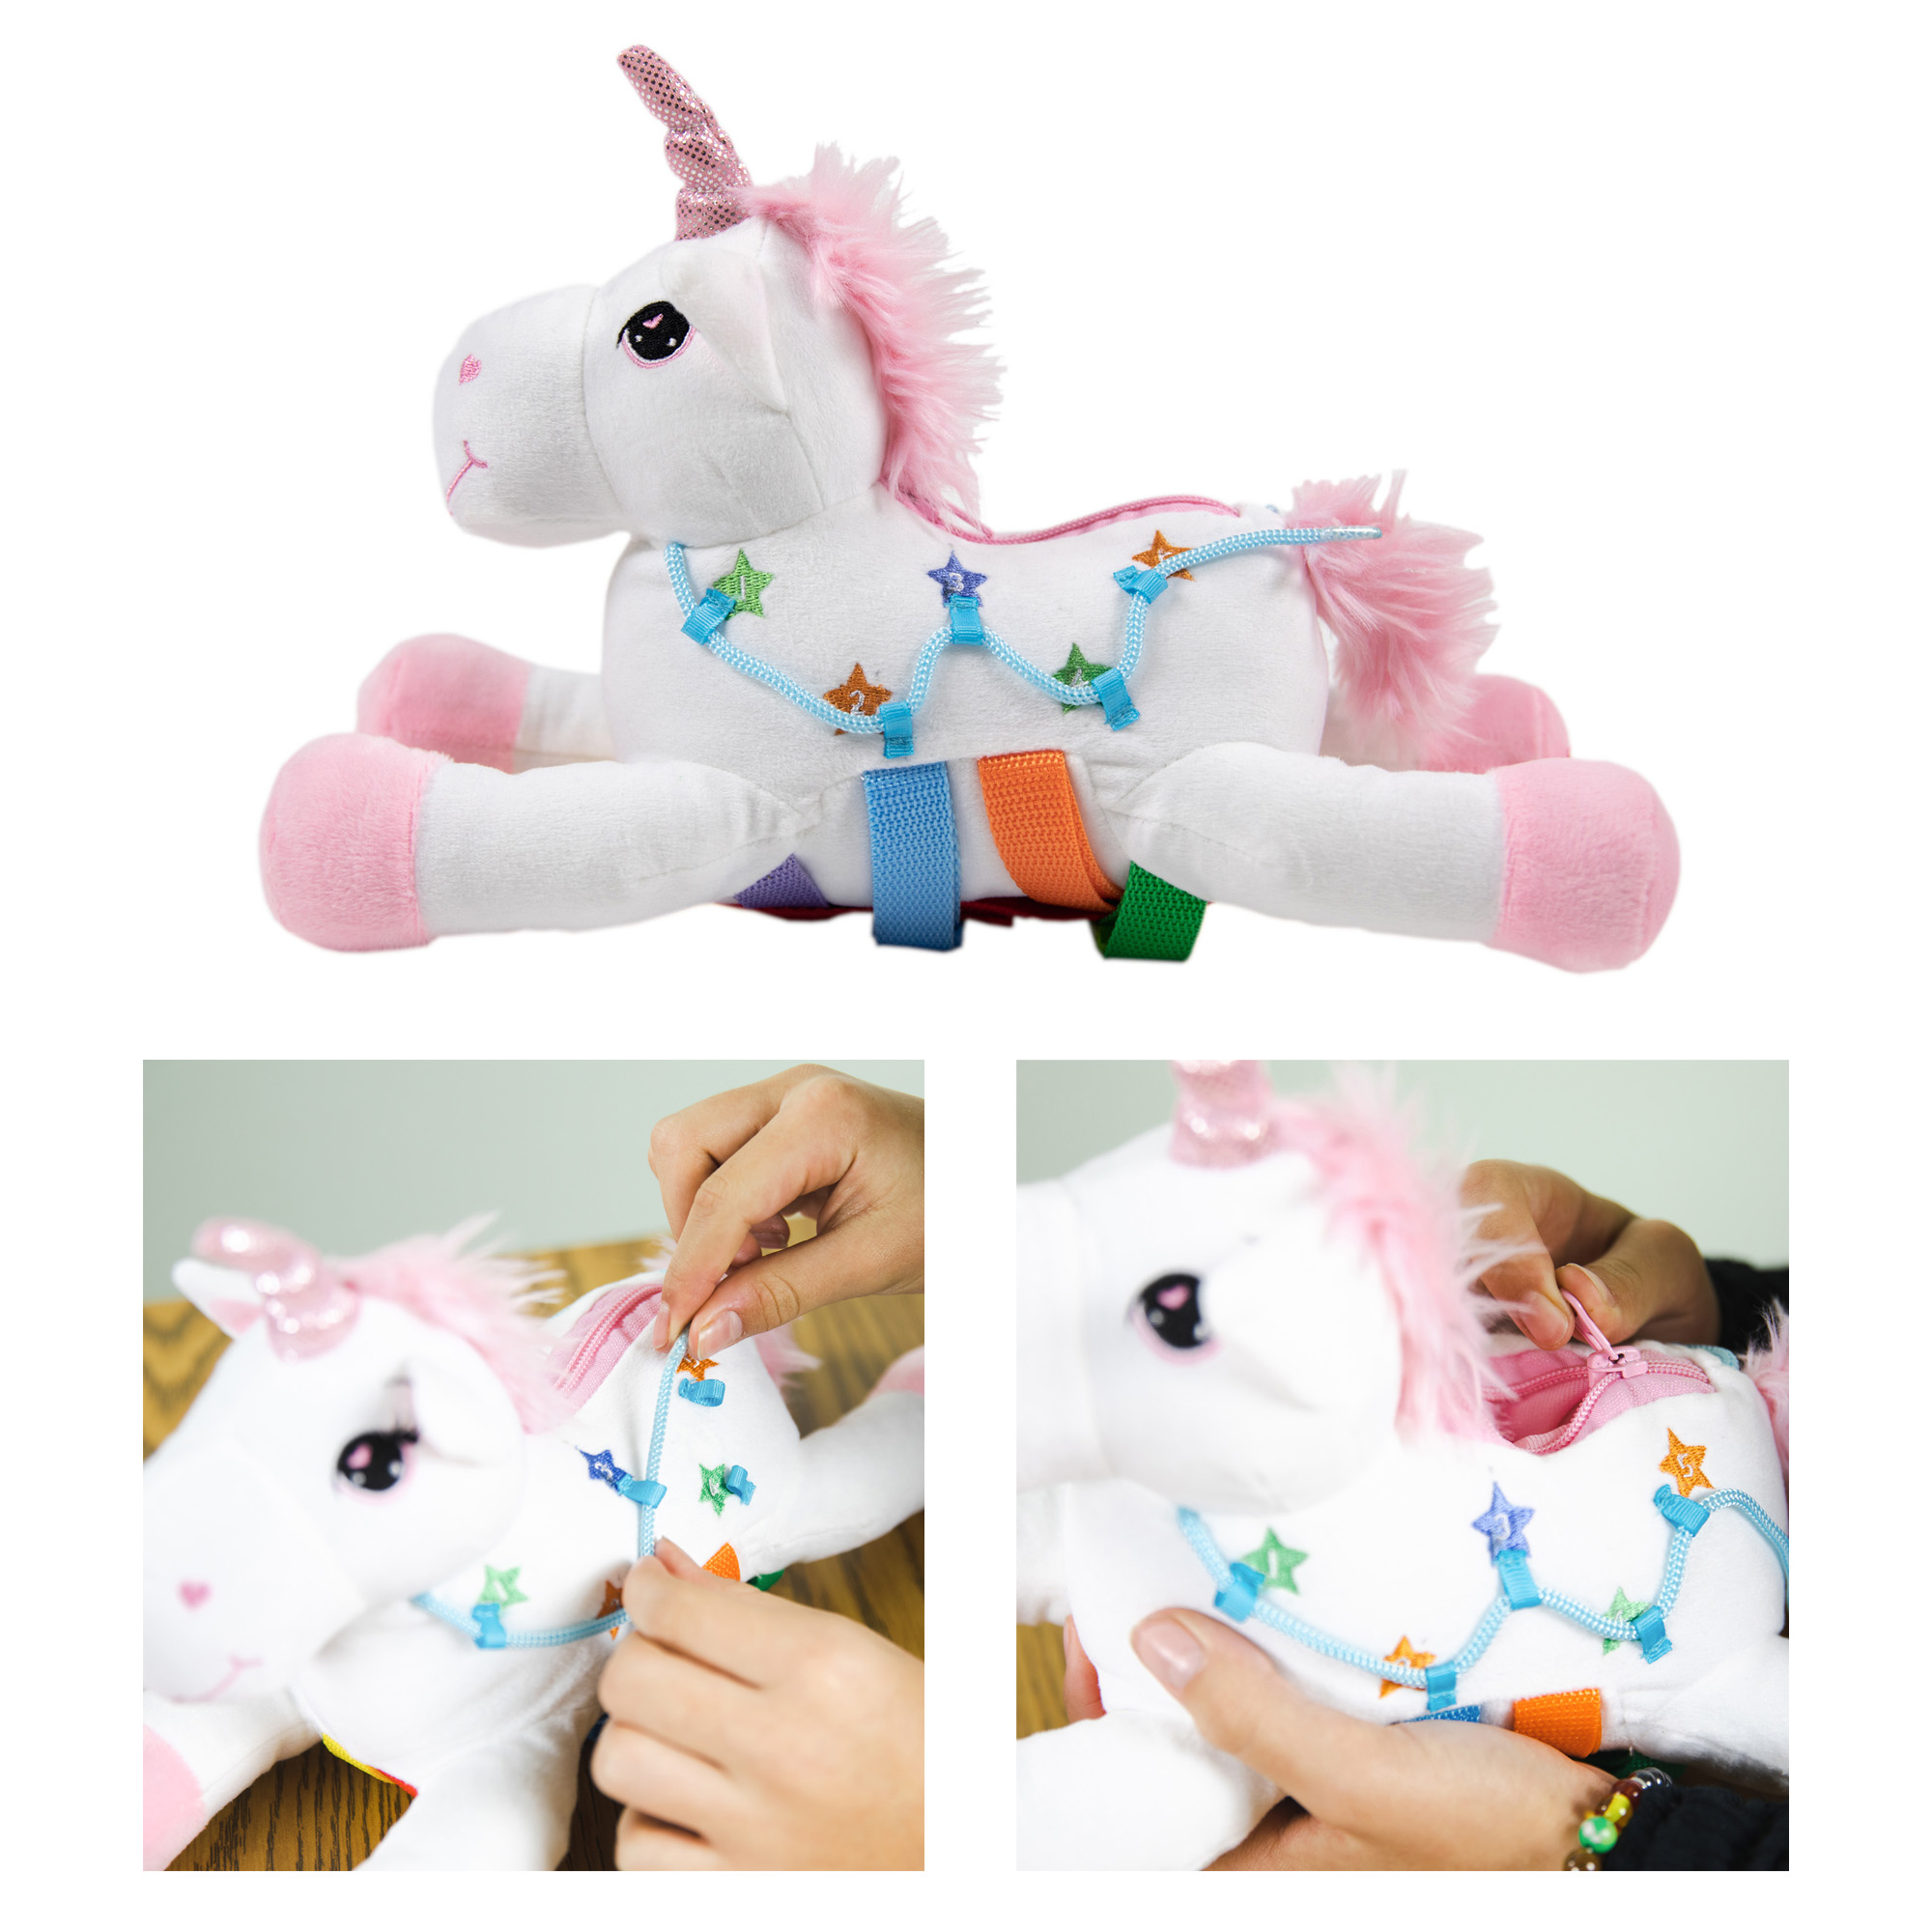 Bouncyband Busy Bee Sensory Activity Toy - Unicorn image number null